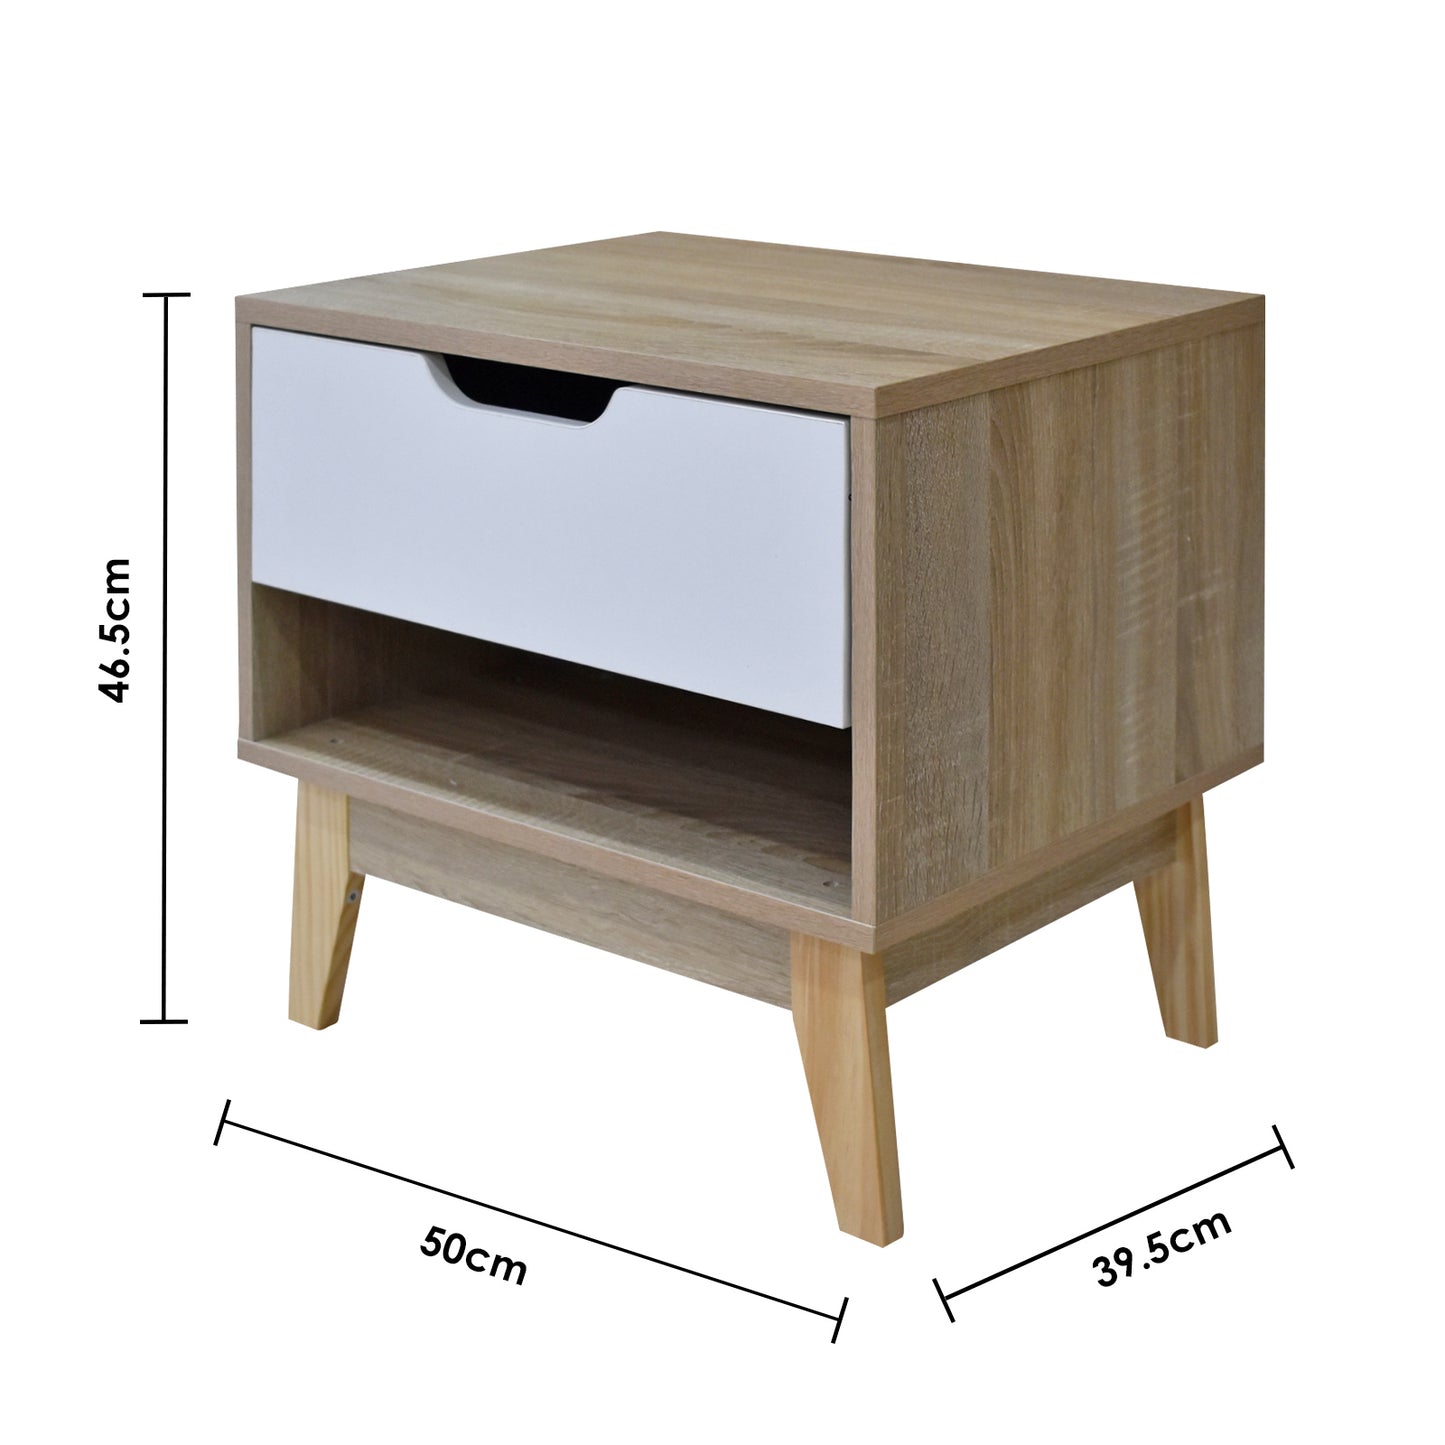 Milano Decor Bedside Table Manly Drawers Nightstand Unit Cabinet Storage